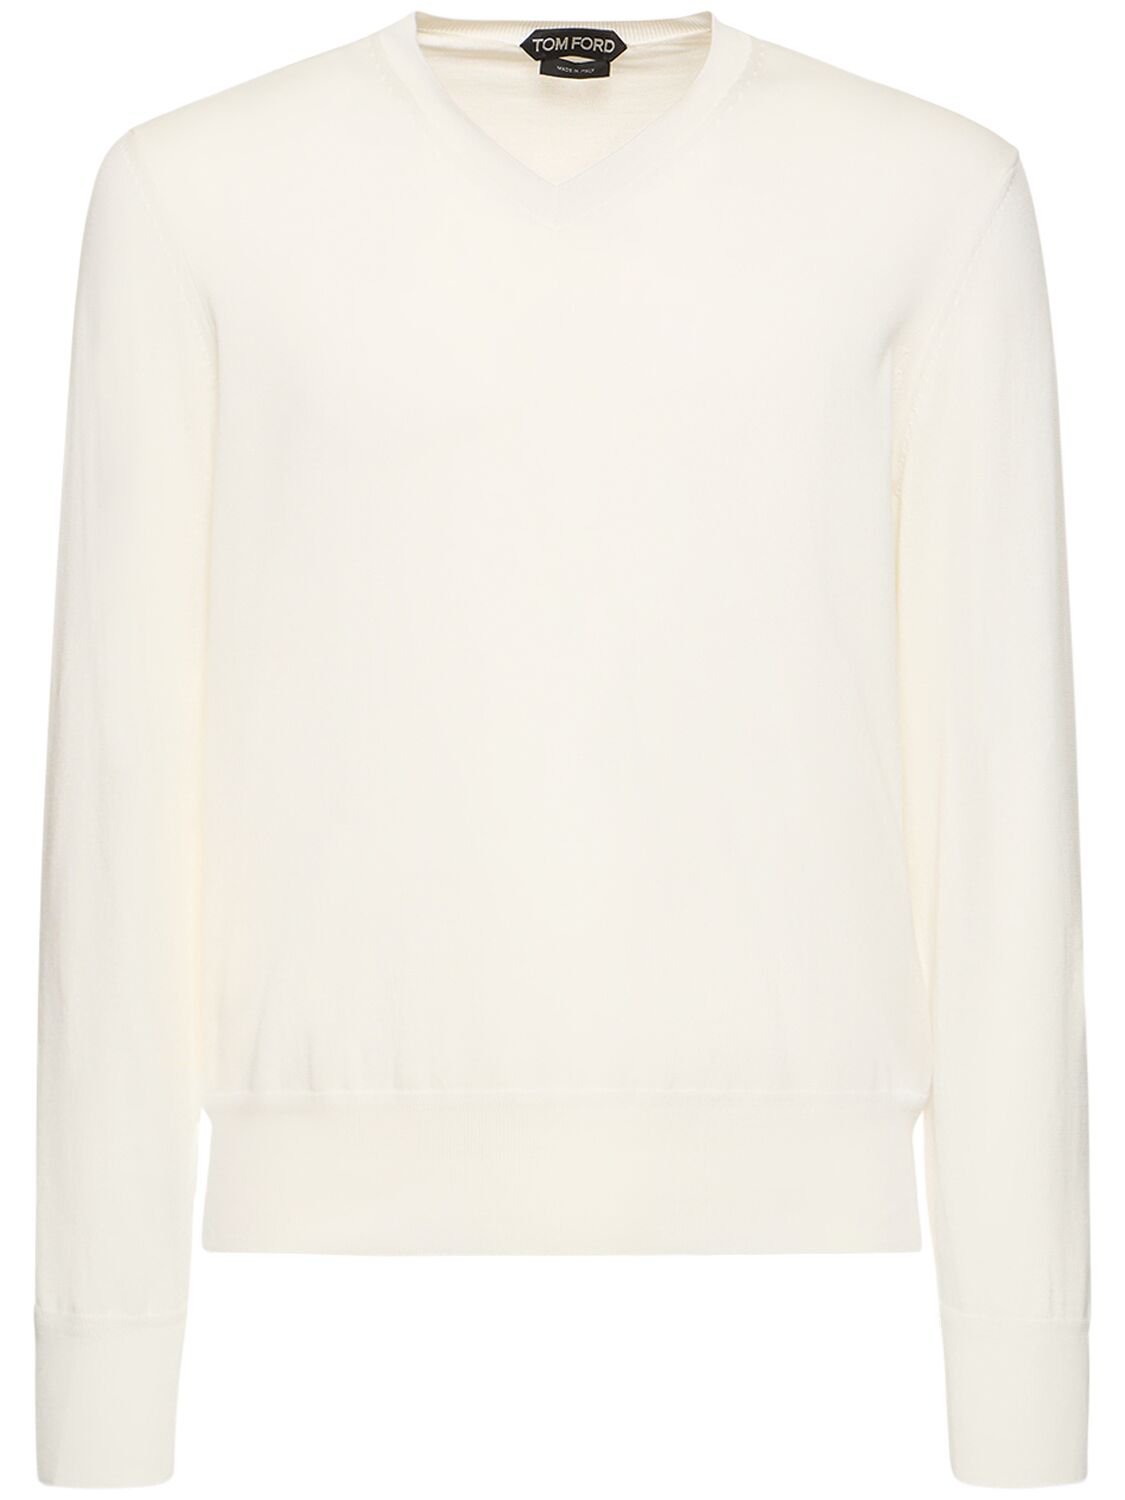 Tom Ford Superfine Cotton V-neck Sweater In Ivory